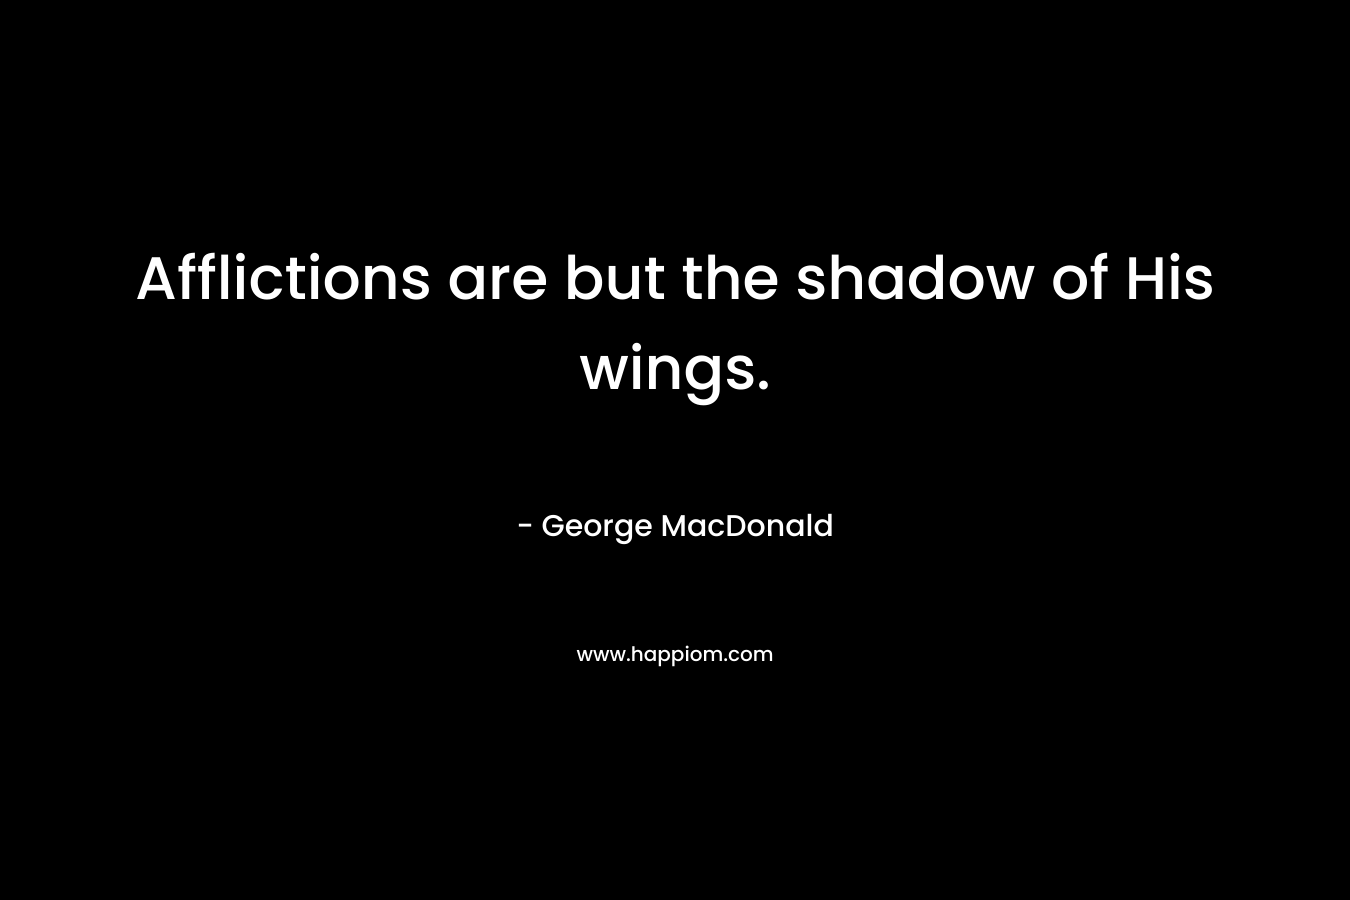 Afflictions are but the shadow of His wings. – George MacDonald